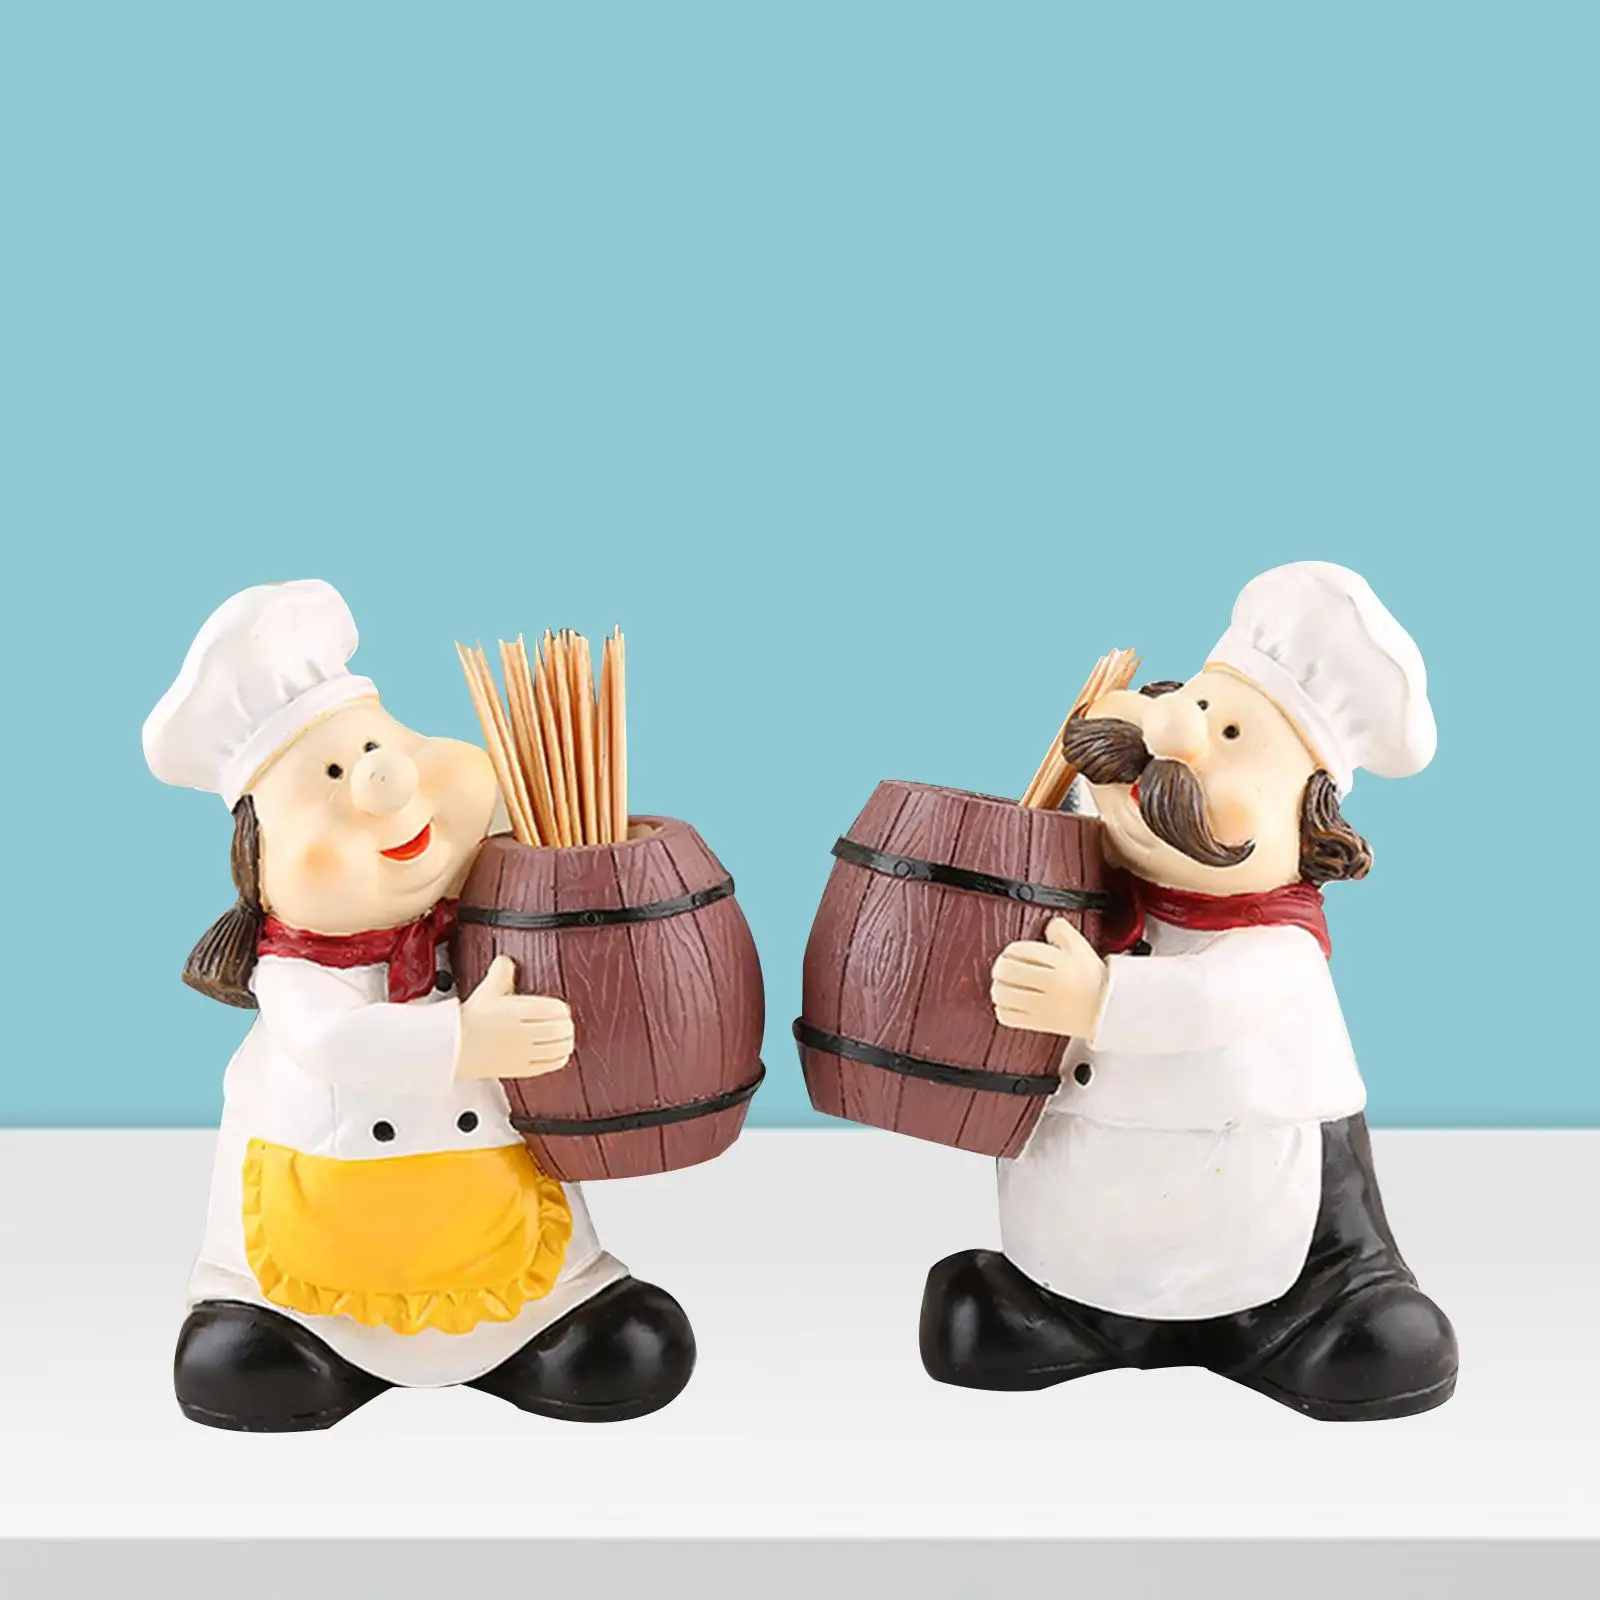 Miniatures Chef Figurines Toothpick Holder Sculpture Business Card Holder Collectible for Hotel Tabletop Craft Accessories Decor